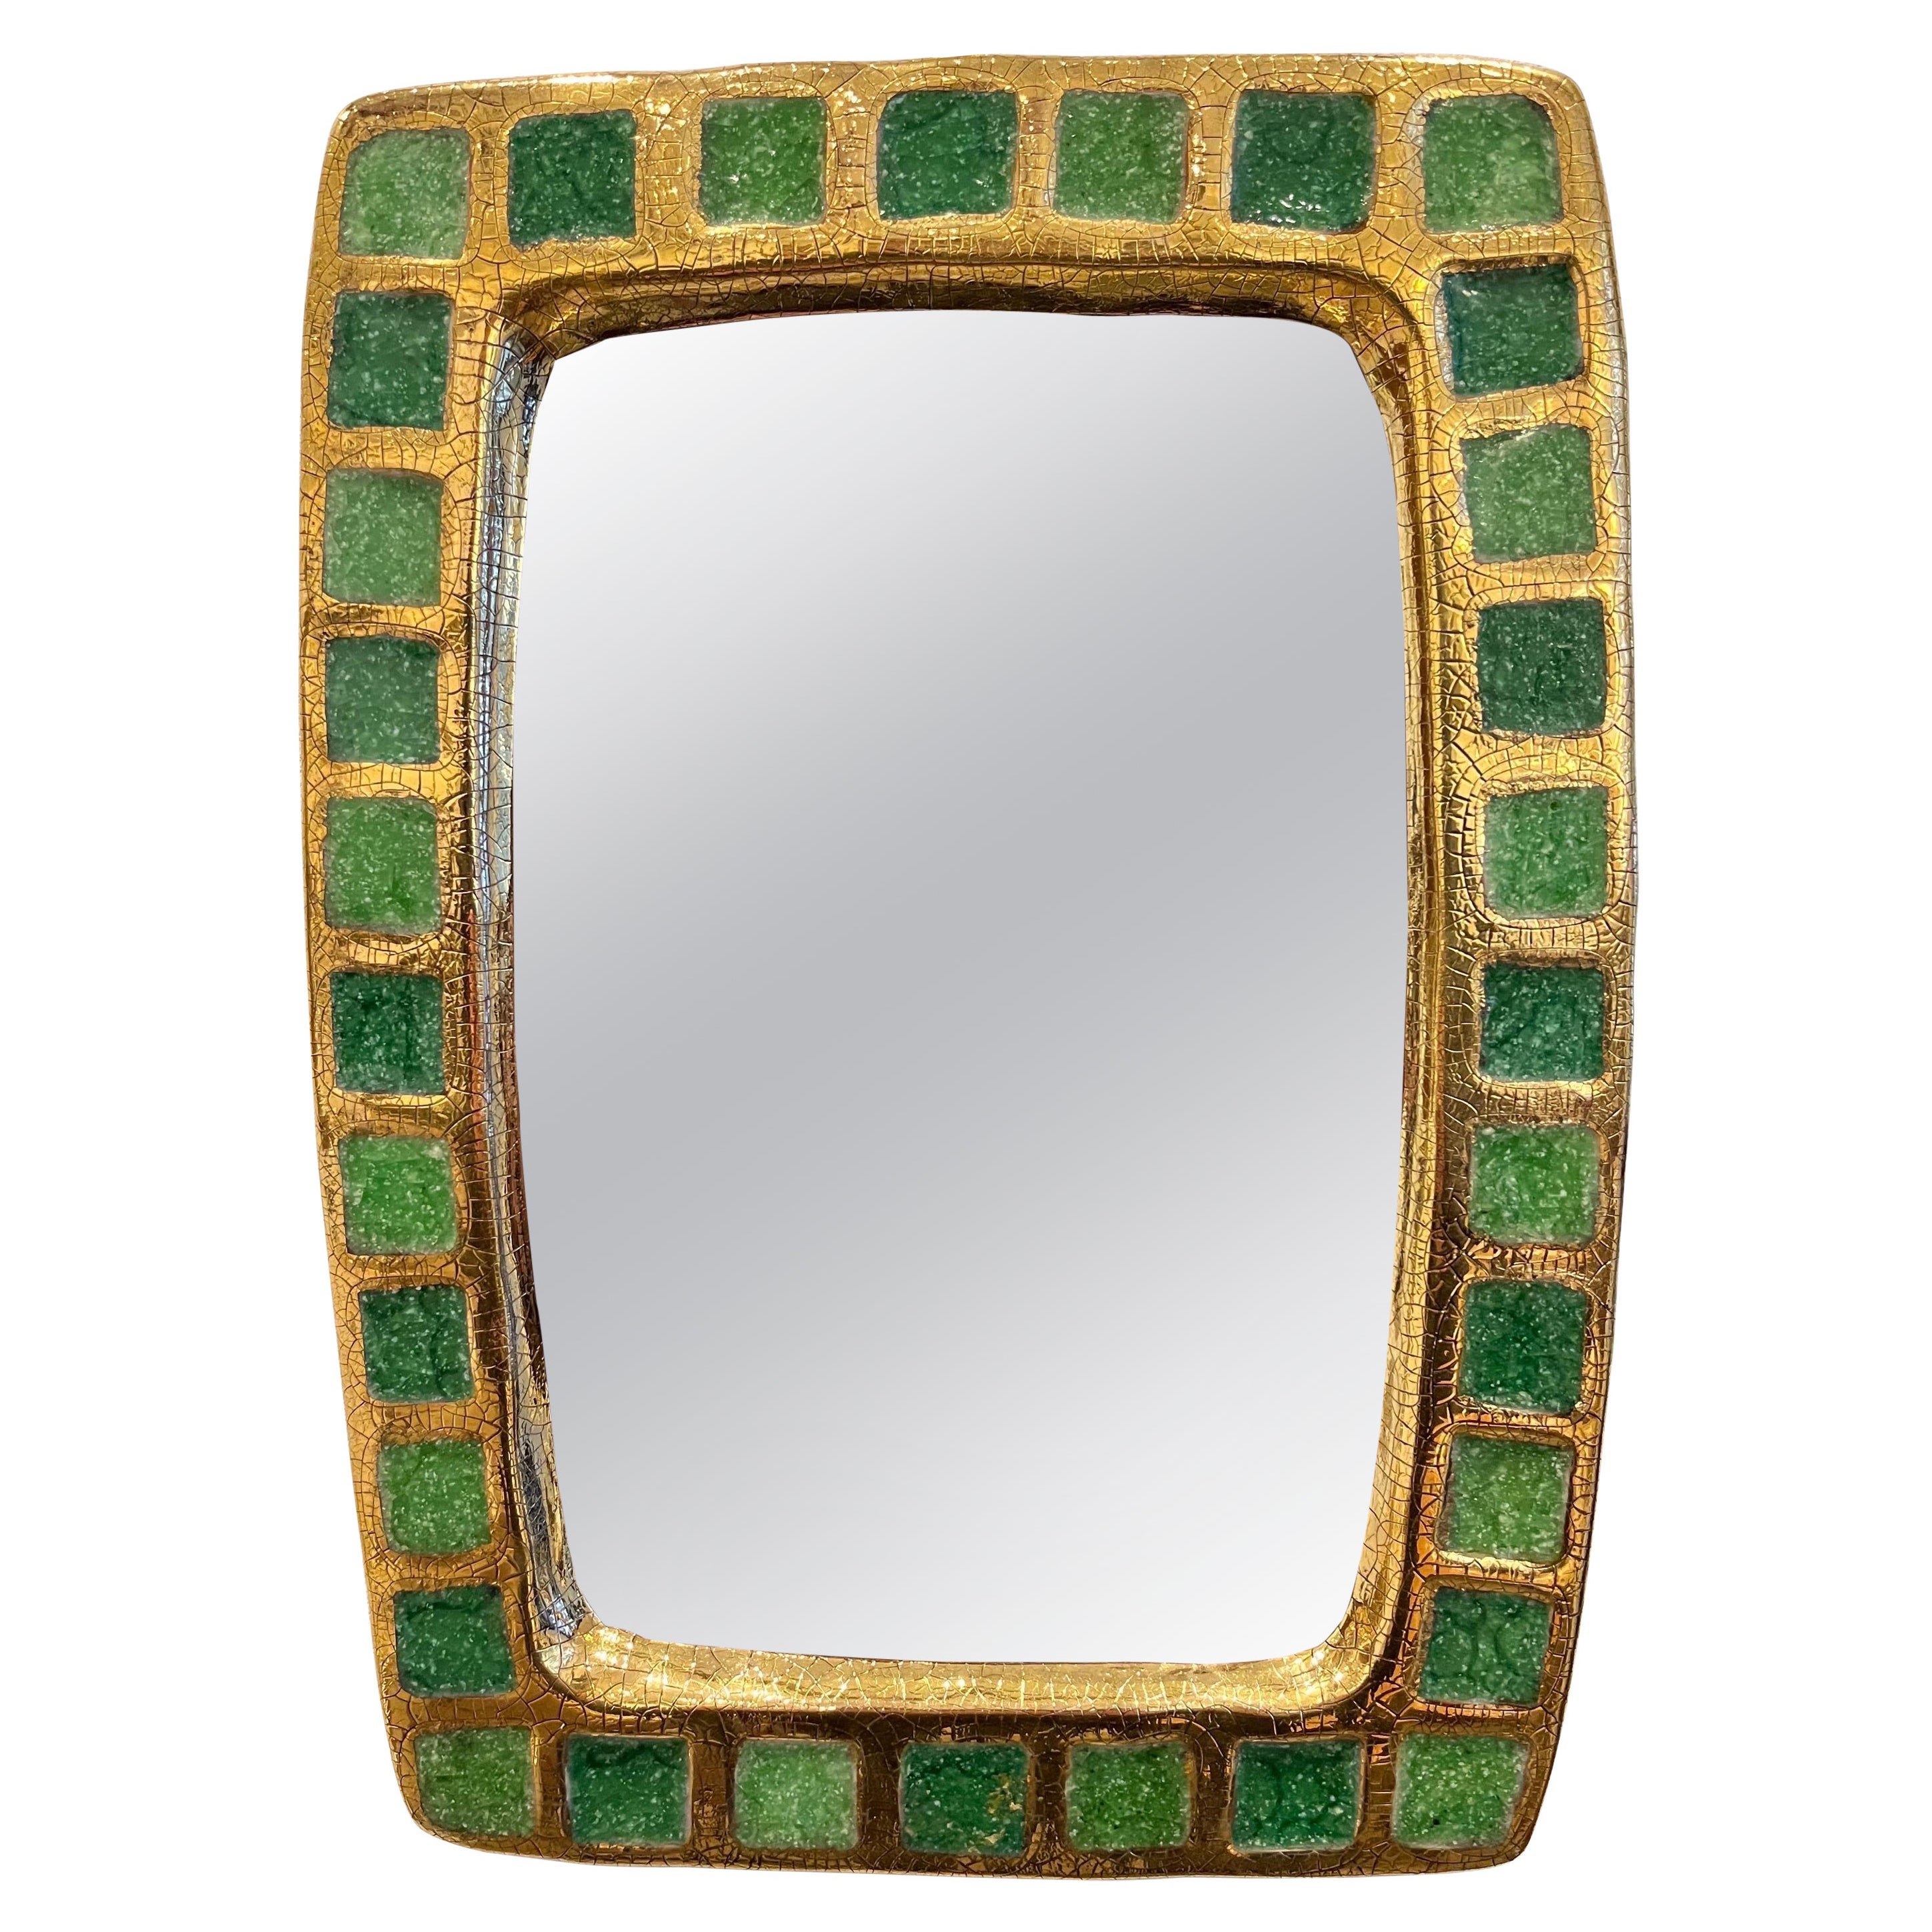 Gilded Green Enameled Ceramic Mirror by Mithé Espelt, 1960s For Sale